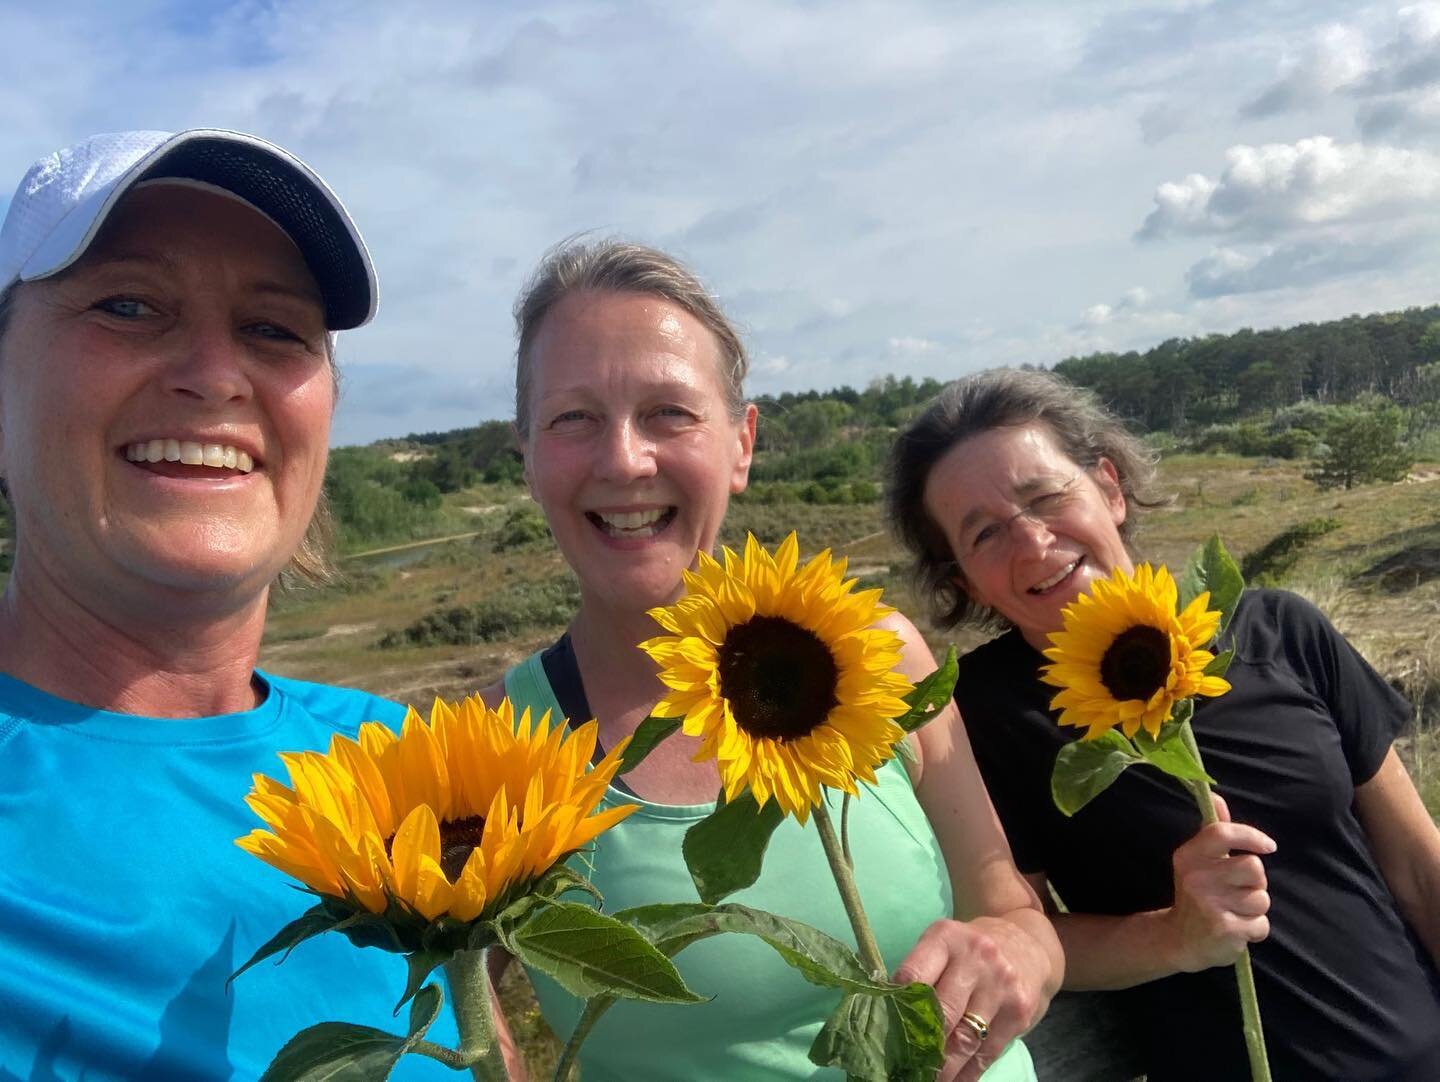 To kick off our virtual run we have had runners from 3 different continents!🌻🌍
There has been Gianna, Clare, and Marinella in The Netherlands, Jay and Co, as well as Chris and Shona, and Dave and Becky in England, Mark did a 12km crawl on the mudfl